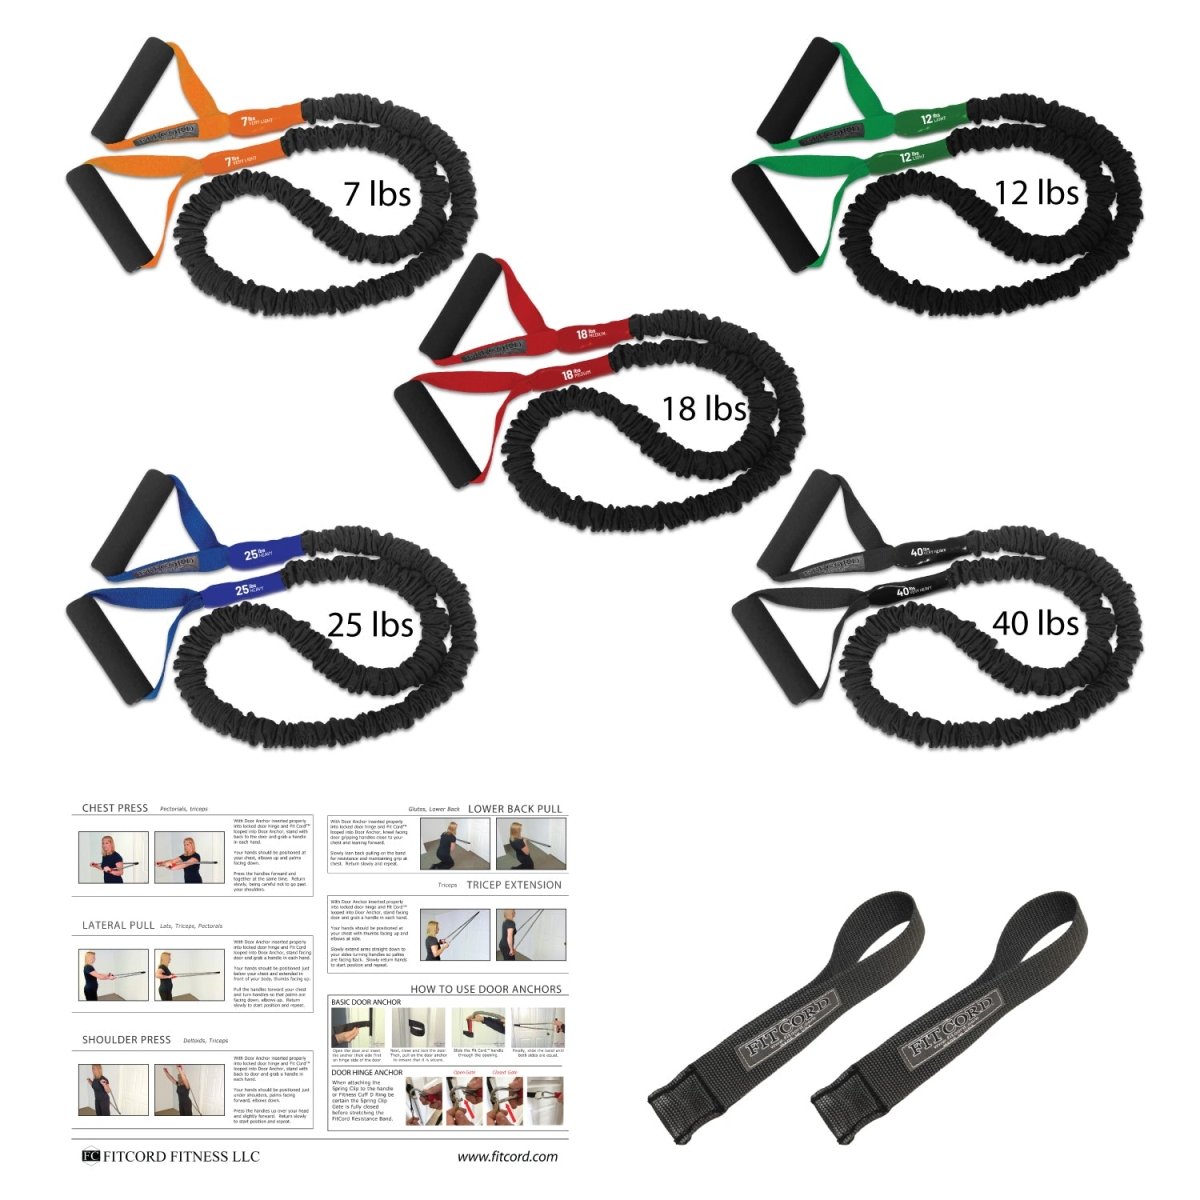 Covered Bungee style exercise band home gym. American made with a lifetime warranty. Comes with 5 bands from Very light to Very heavy resistance levels plus 2 anchors and workout guide. Perfect for a home gym that doesnt take up space in your home.